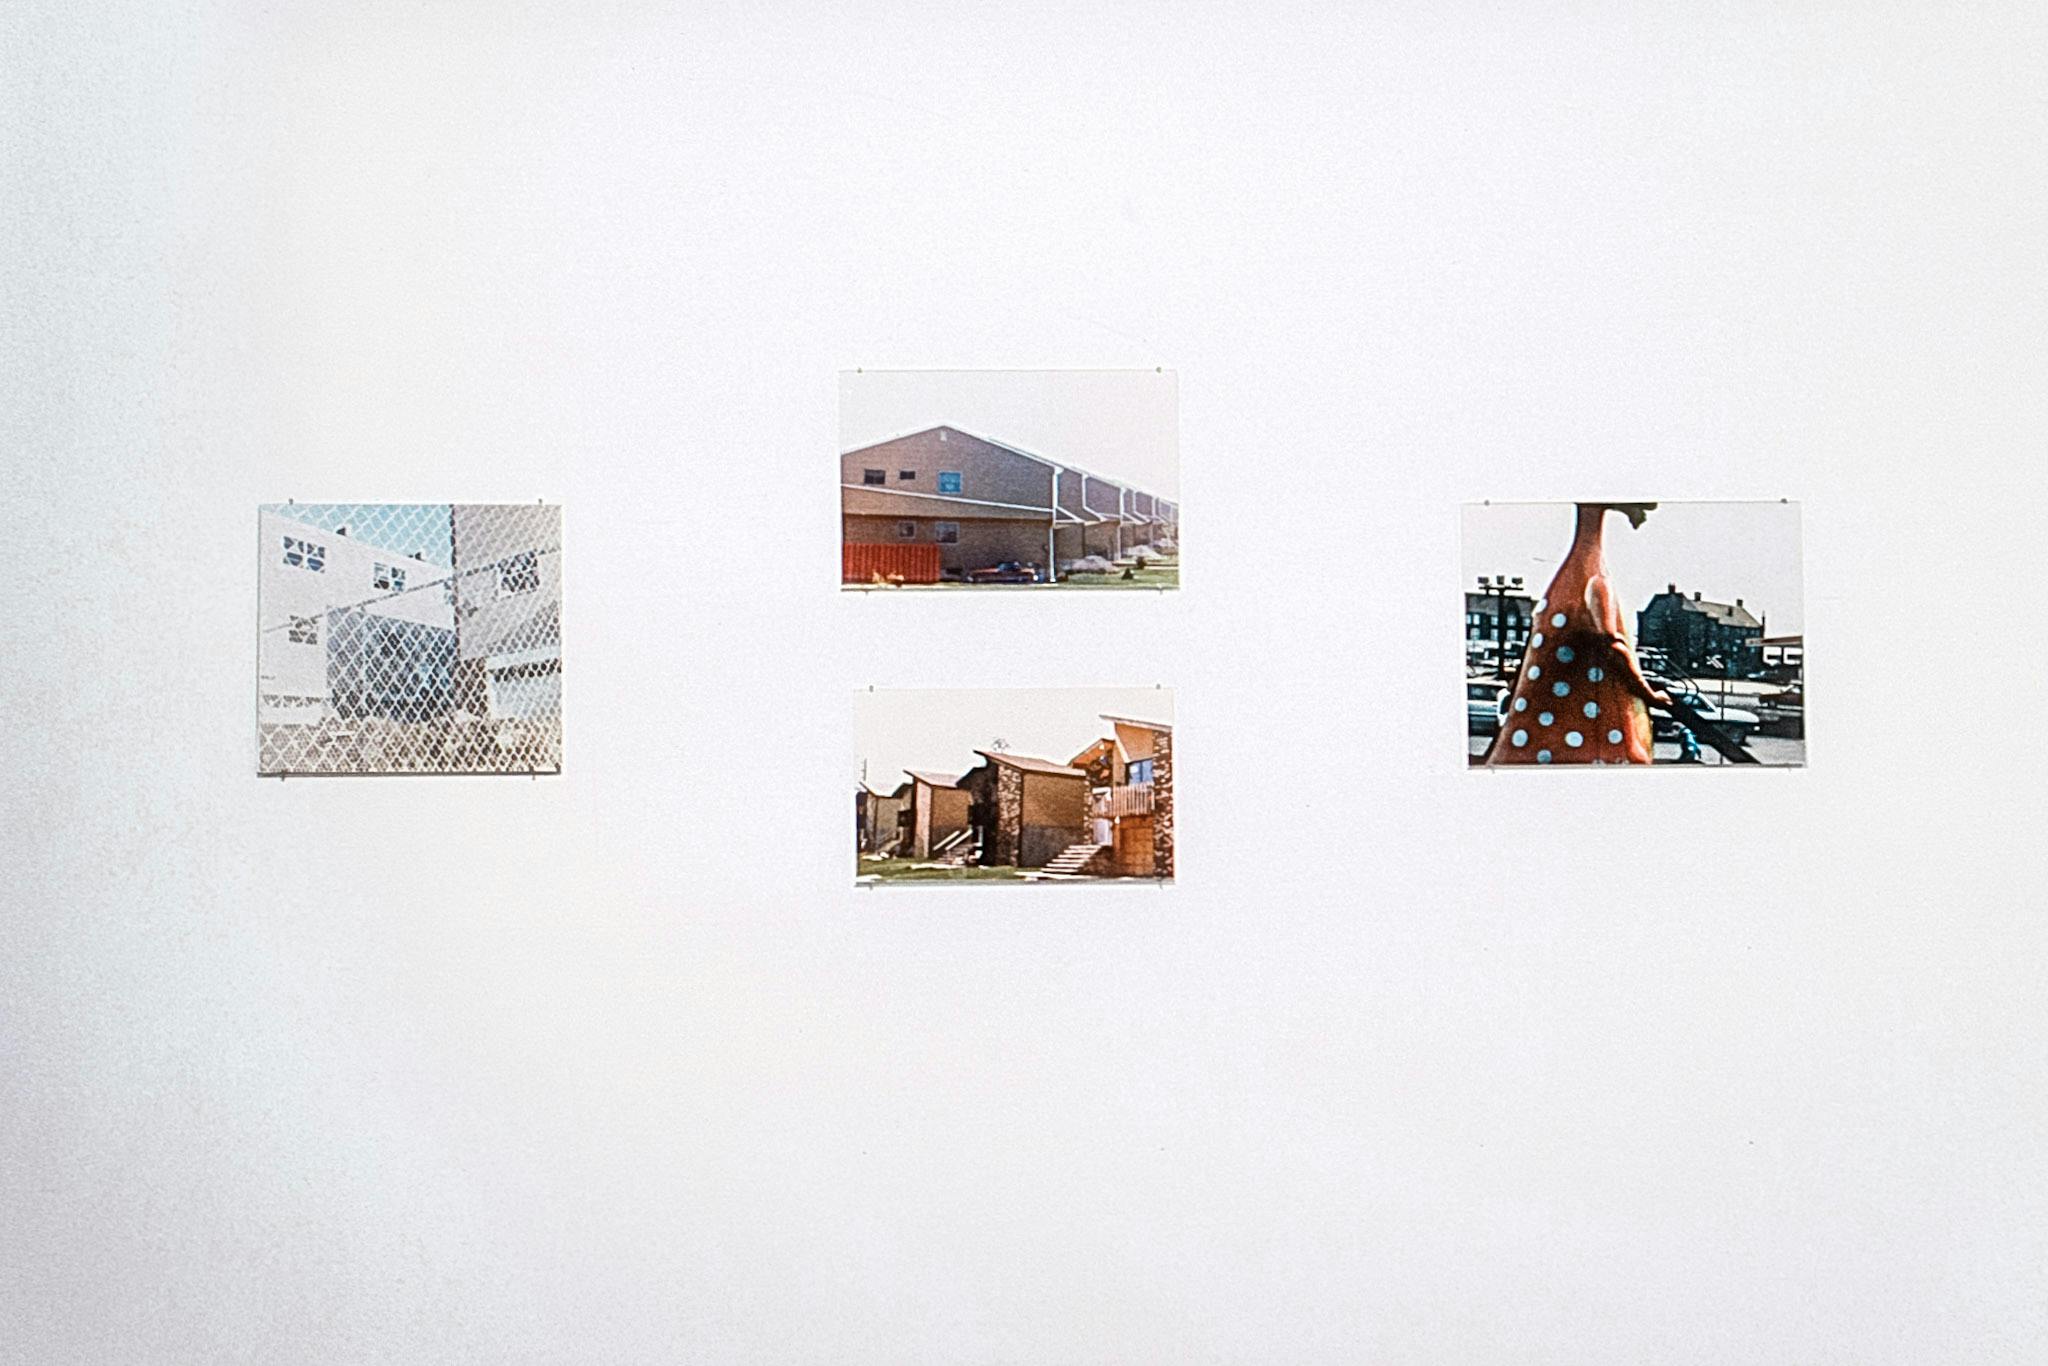 A closeup of 4 unframed photos on a white wall. One has an apartment complex with a fence, one shows townhouses, one has similar houses in a row, and one shows a playground in front of apartments.